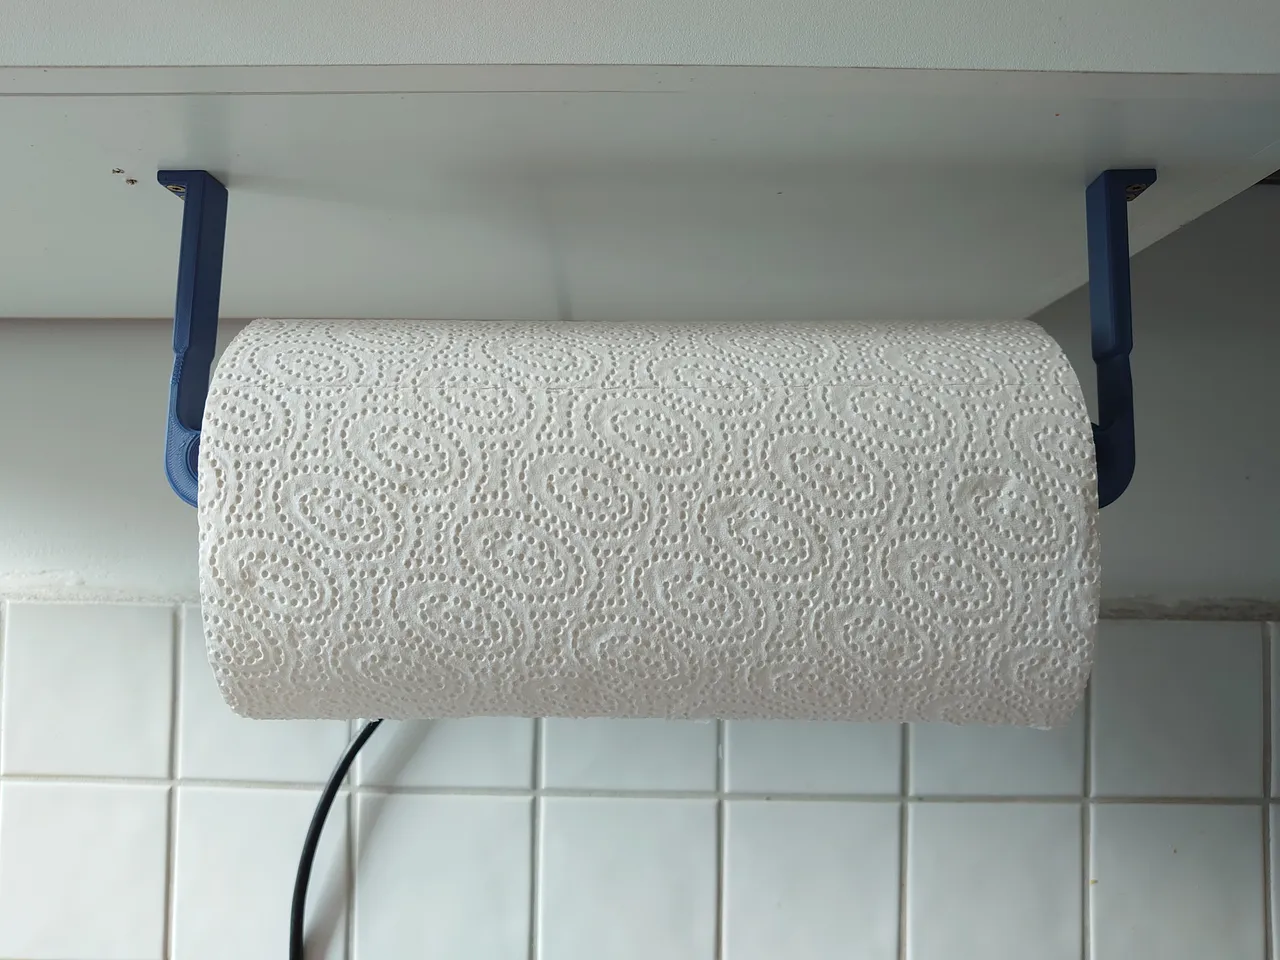 Paper Towel Holder - Print in place & quick swap by koehlr